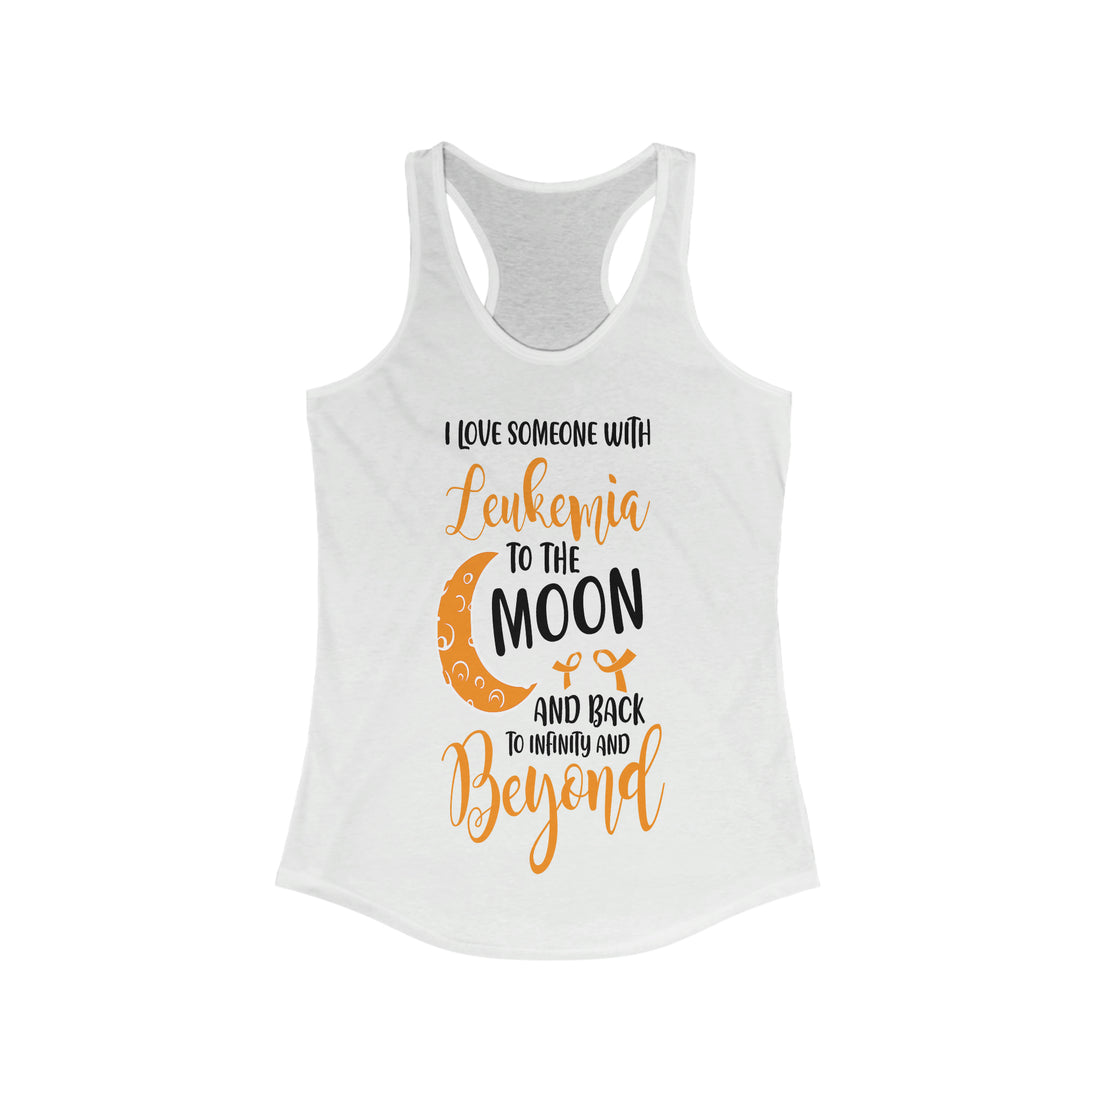 I Love Someone With Leukemia To The Moon And Back - Racerback Tank Top